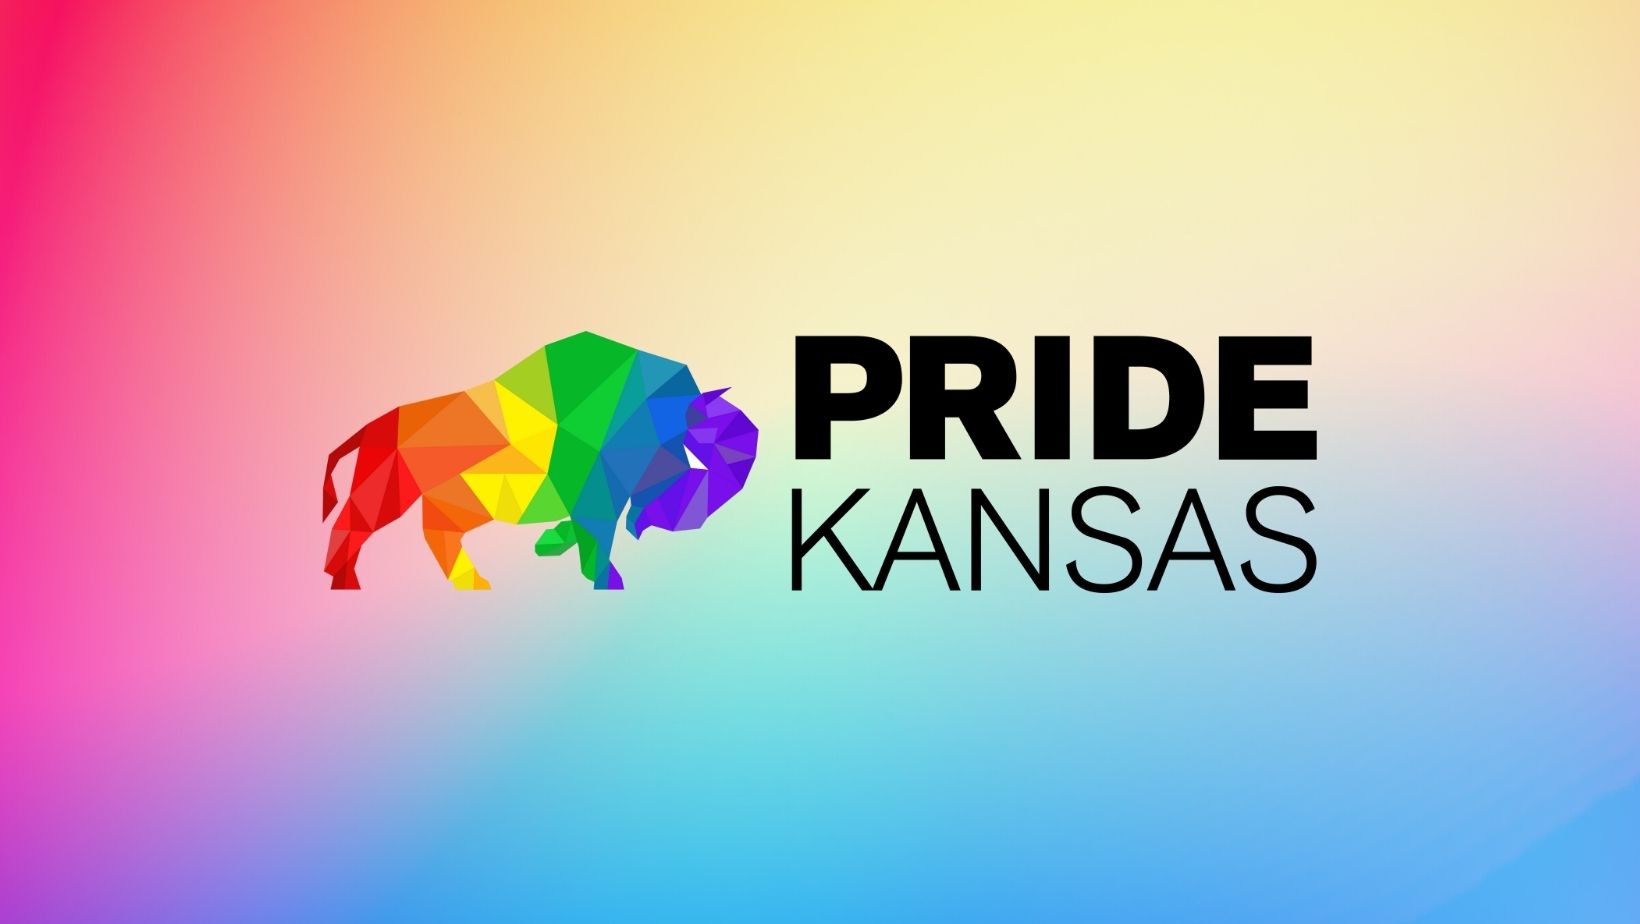 The first statewide Pride celebration is happening in Topeka from September 17-24. Logo courtesy of Pride Kansas.